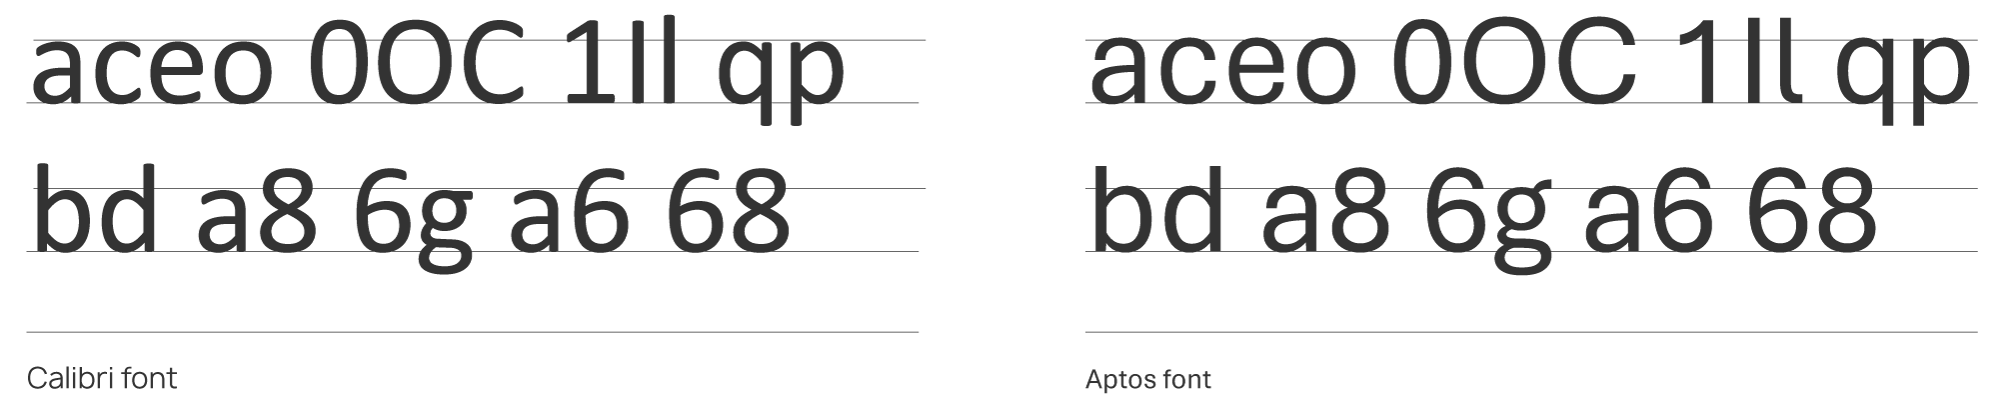 A series of similar characters shown in Calibri font and Aptos font.